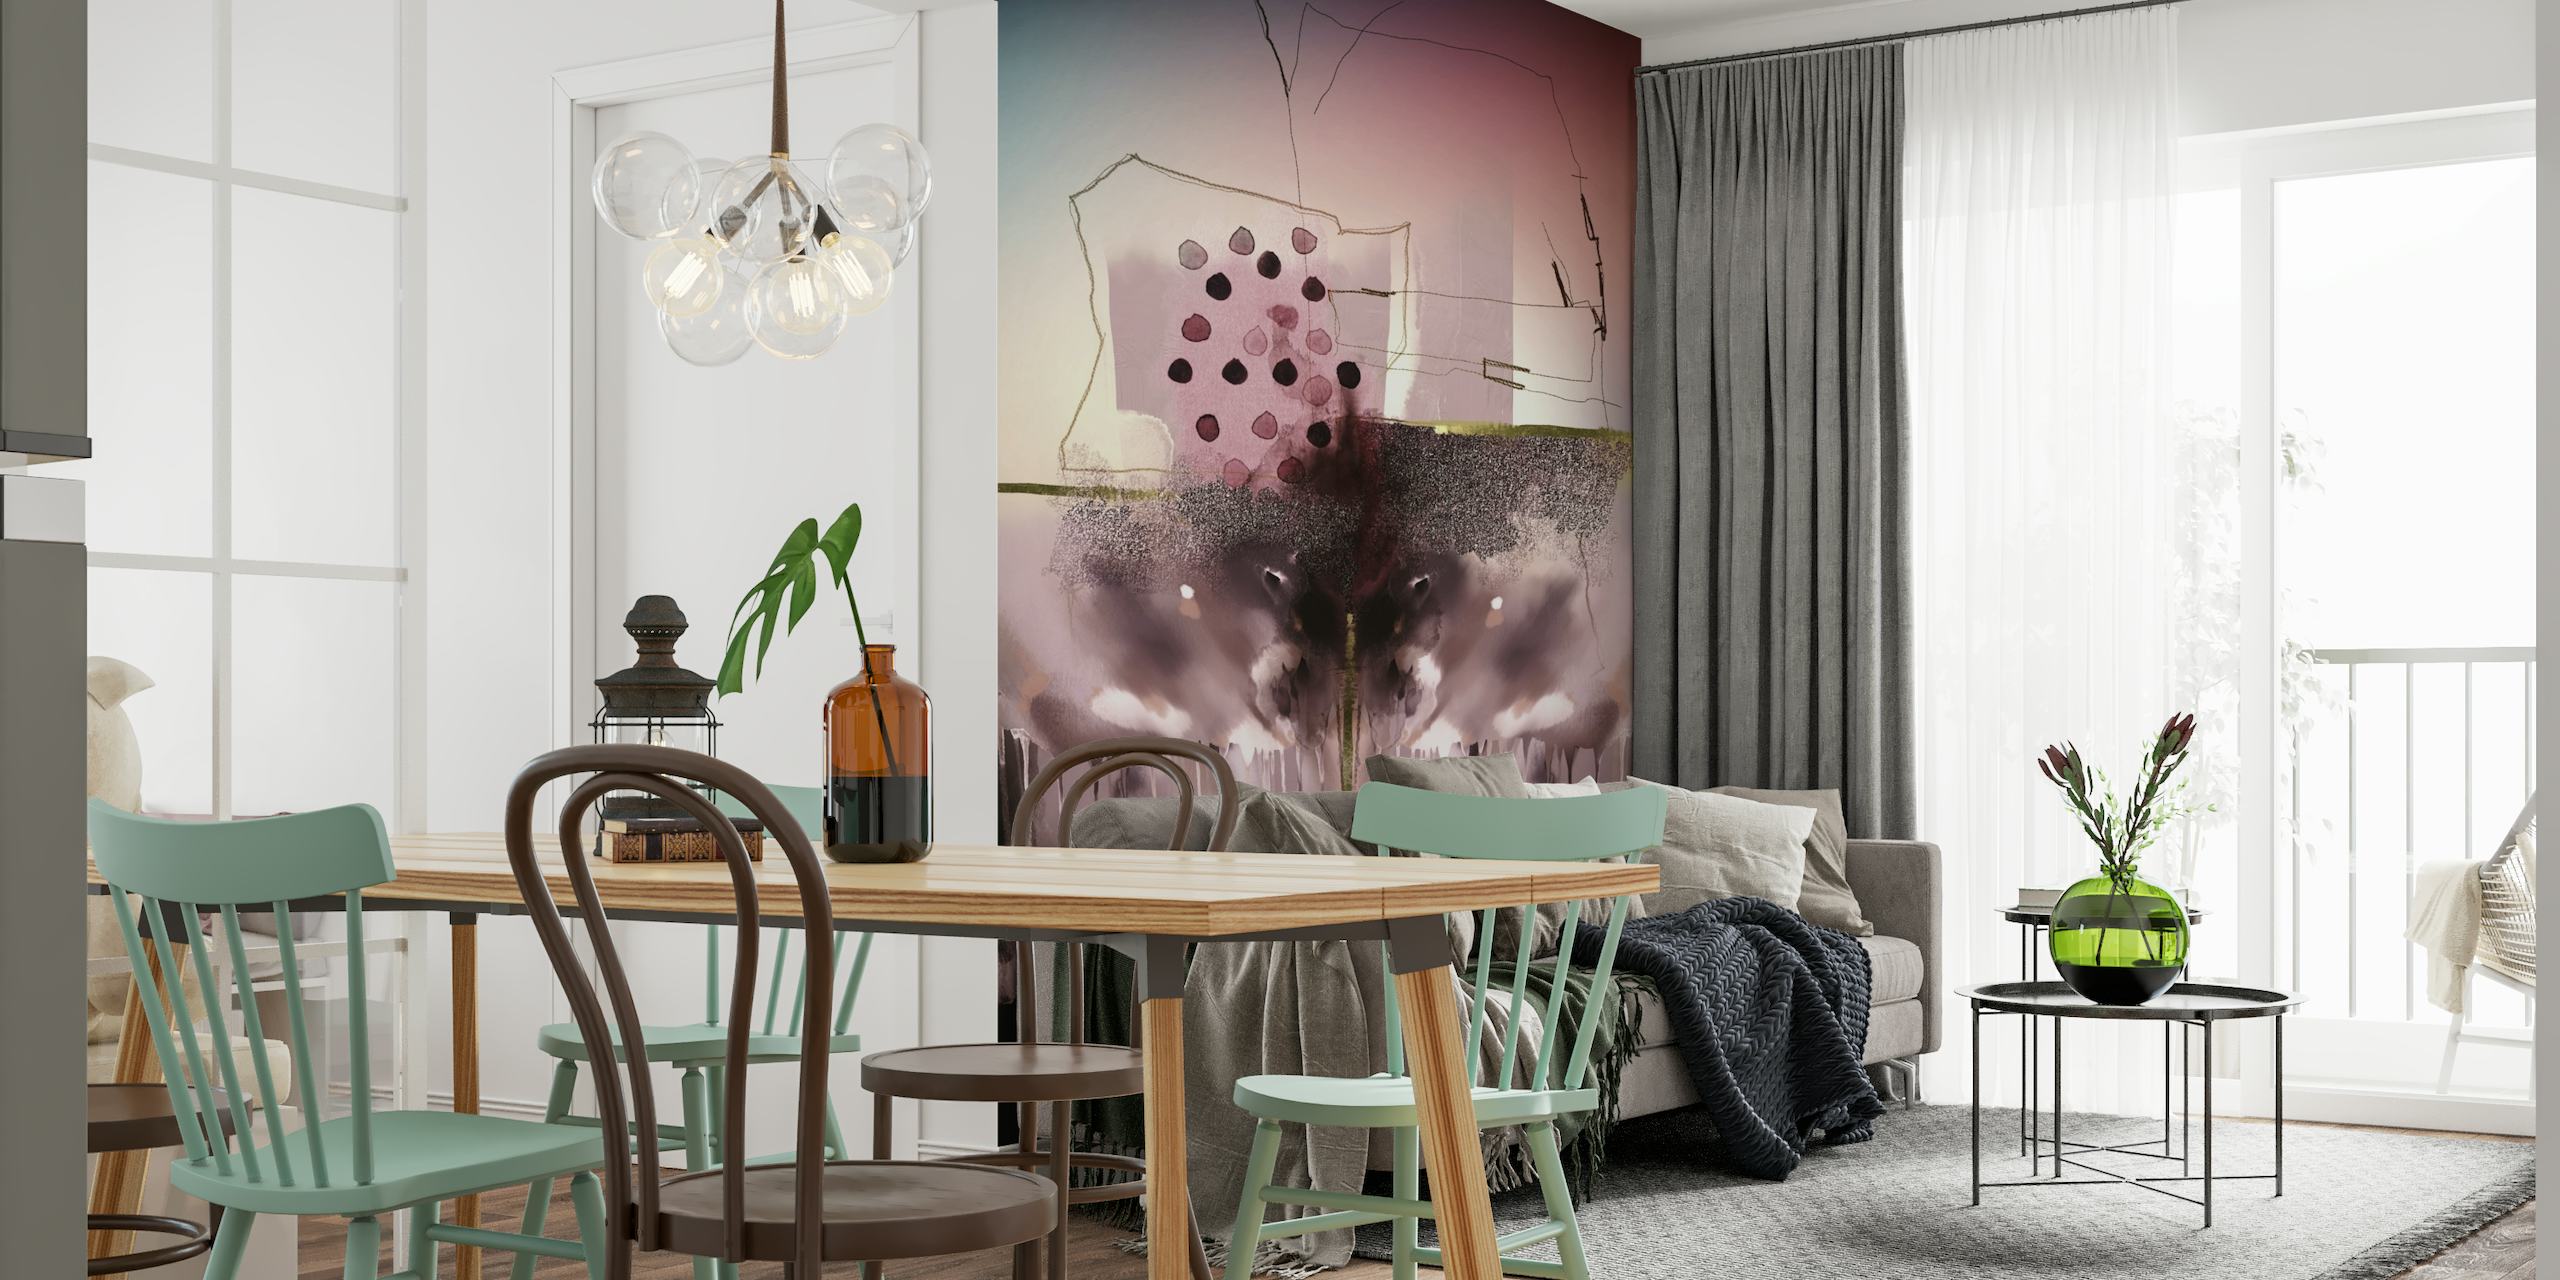 Abstract wall mural with dark tones and ambiguous shapes, offering a contemplative artwork for interior walls